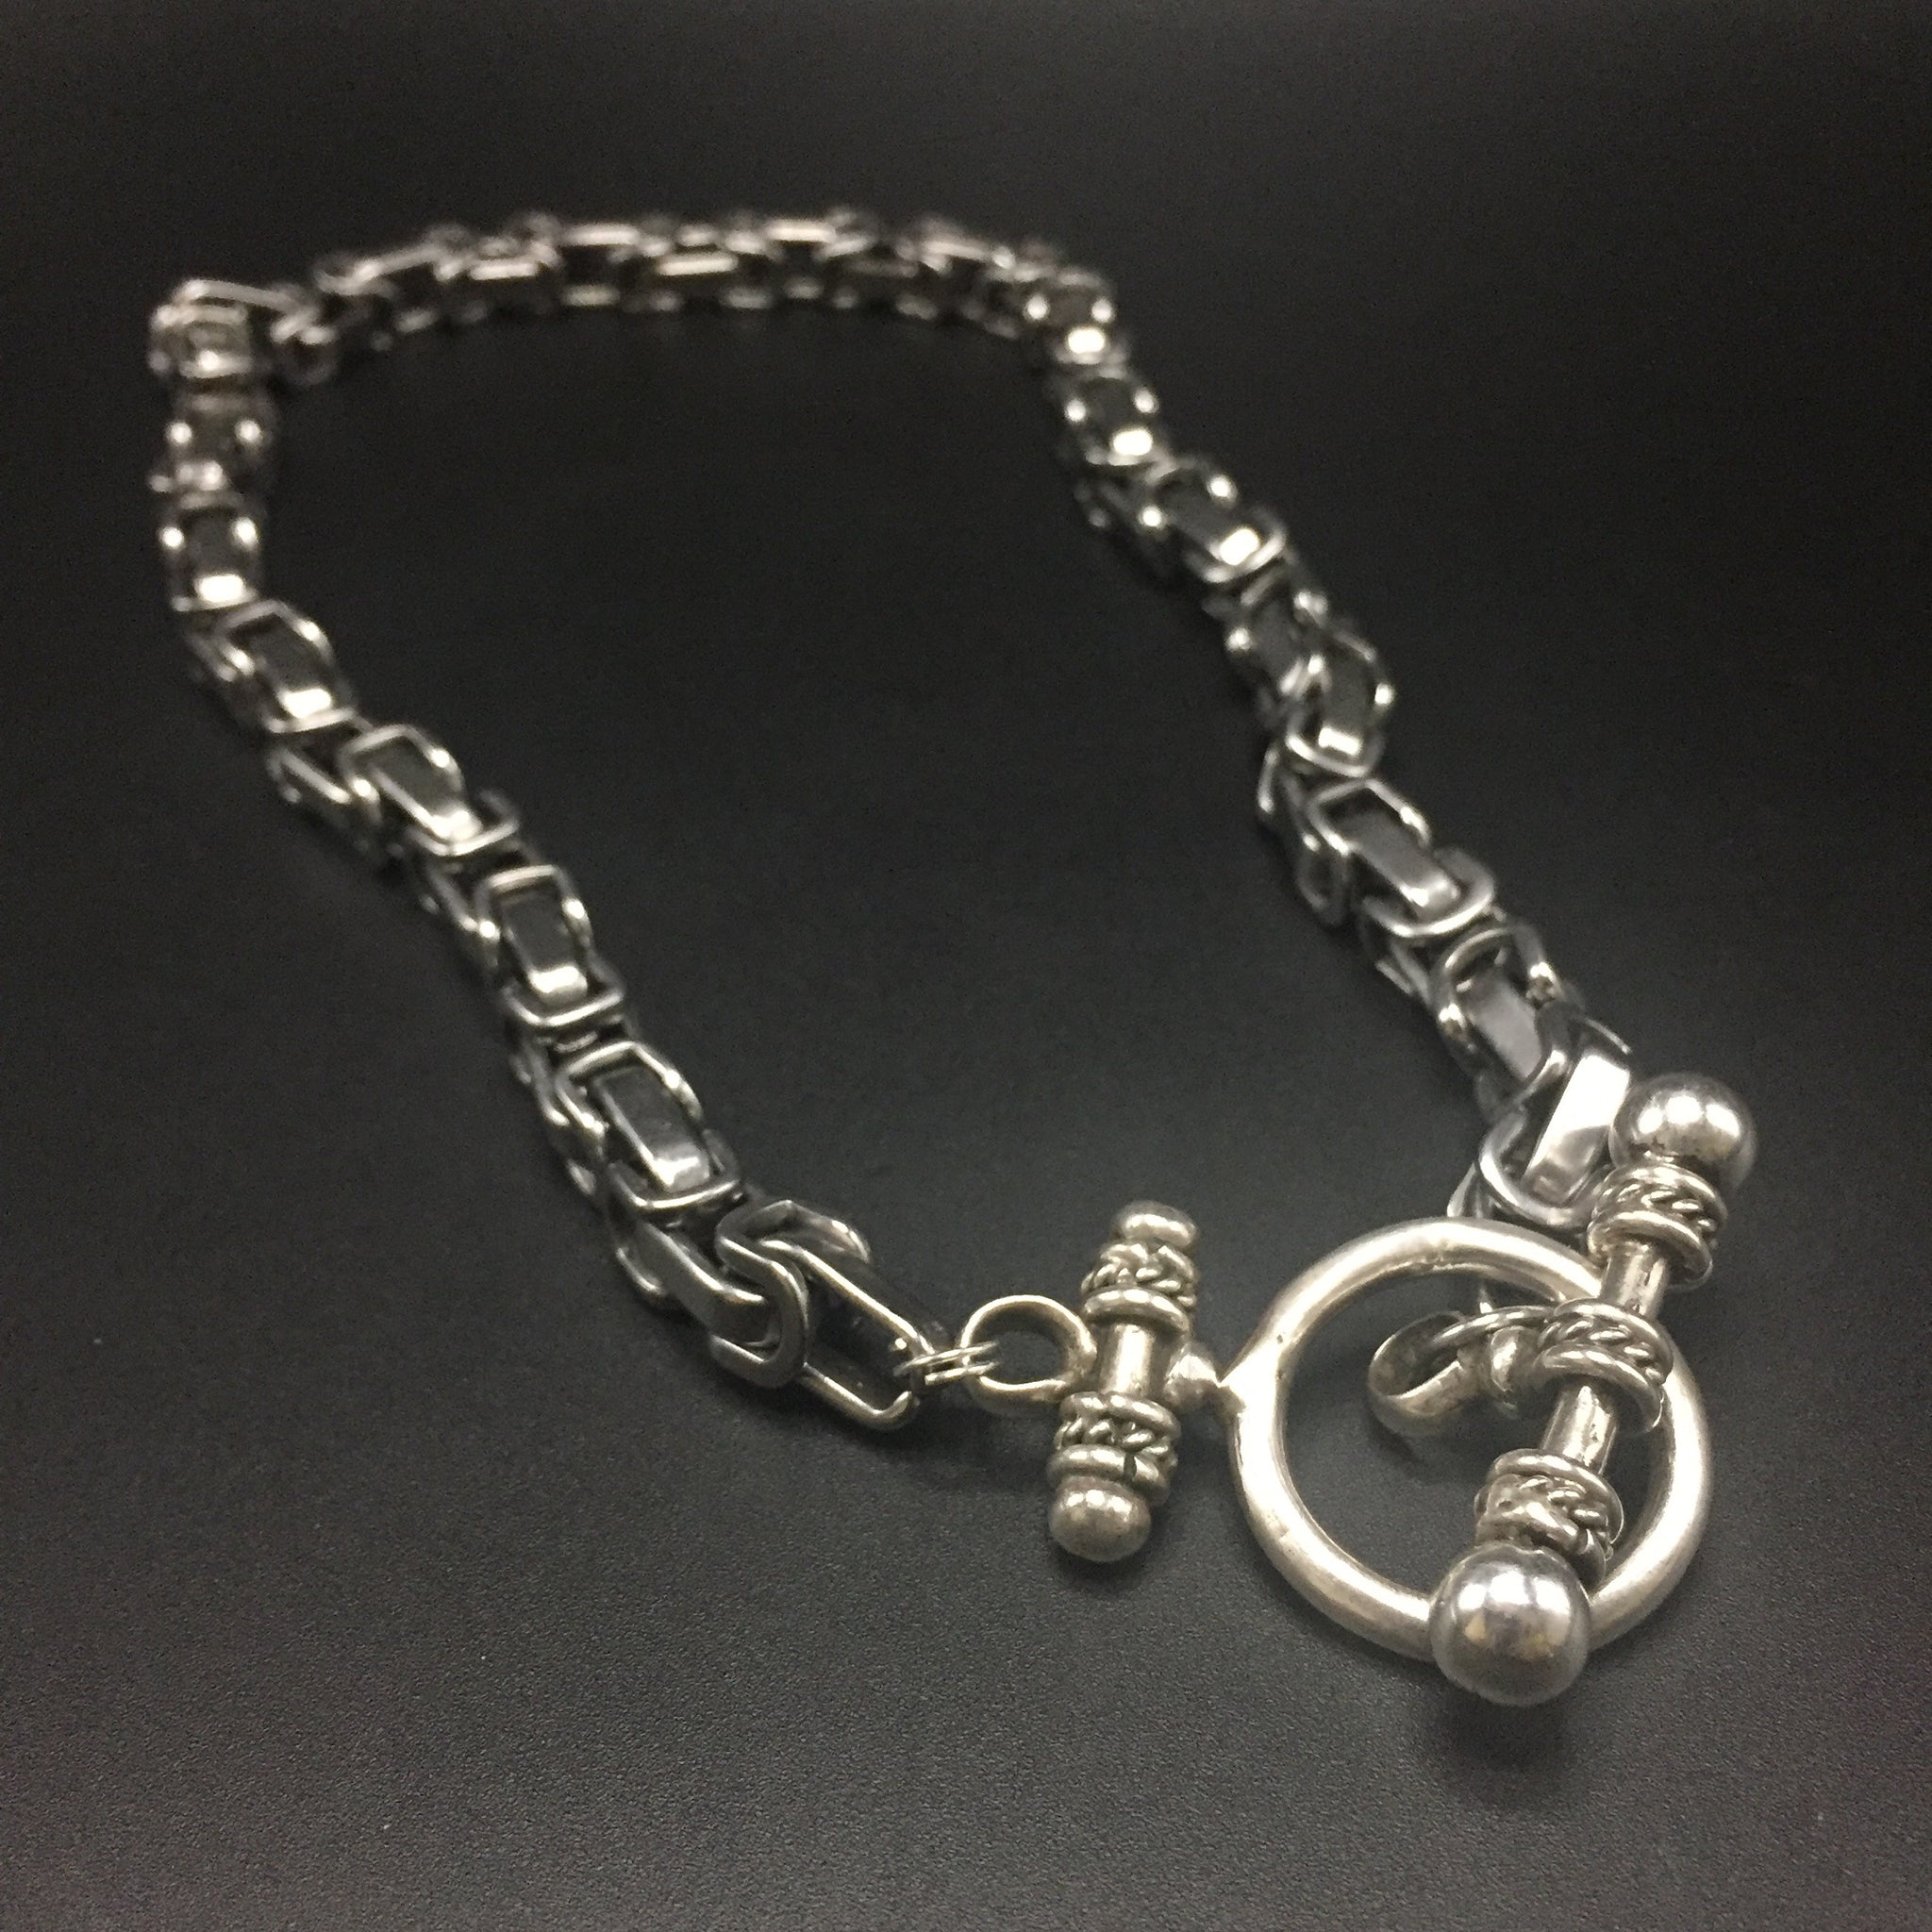 Tungsten byzantine links with a sterling toggle  clasp.